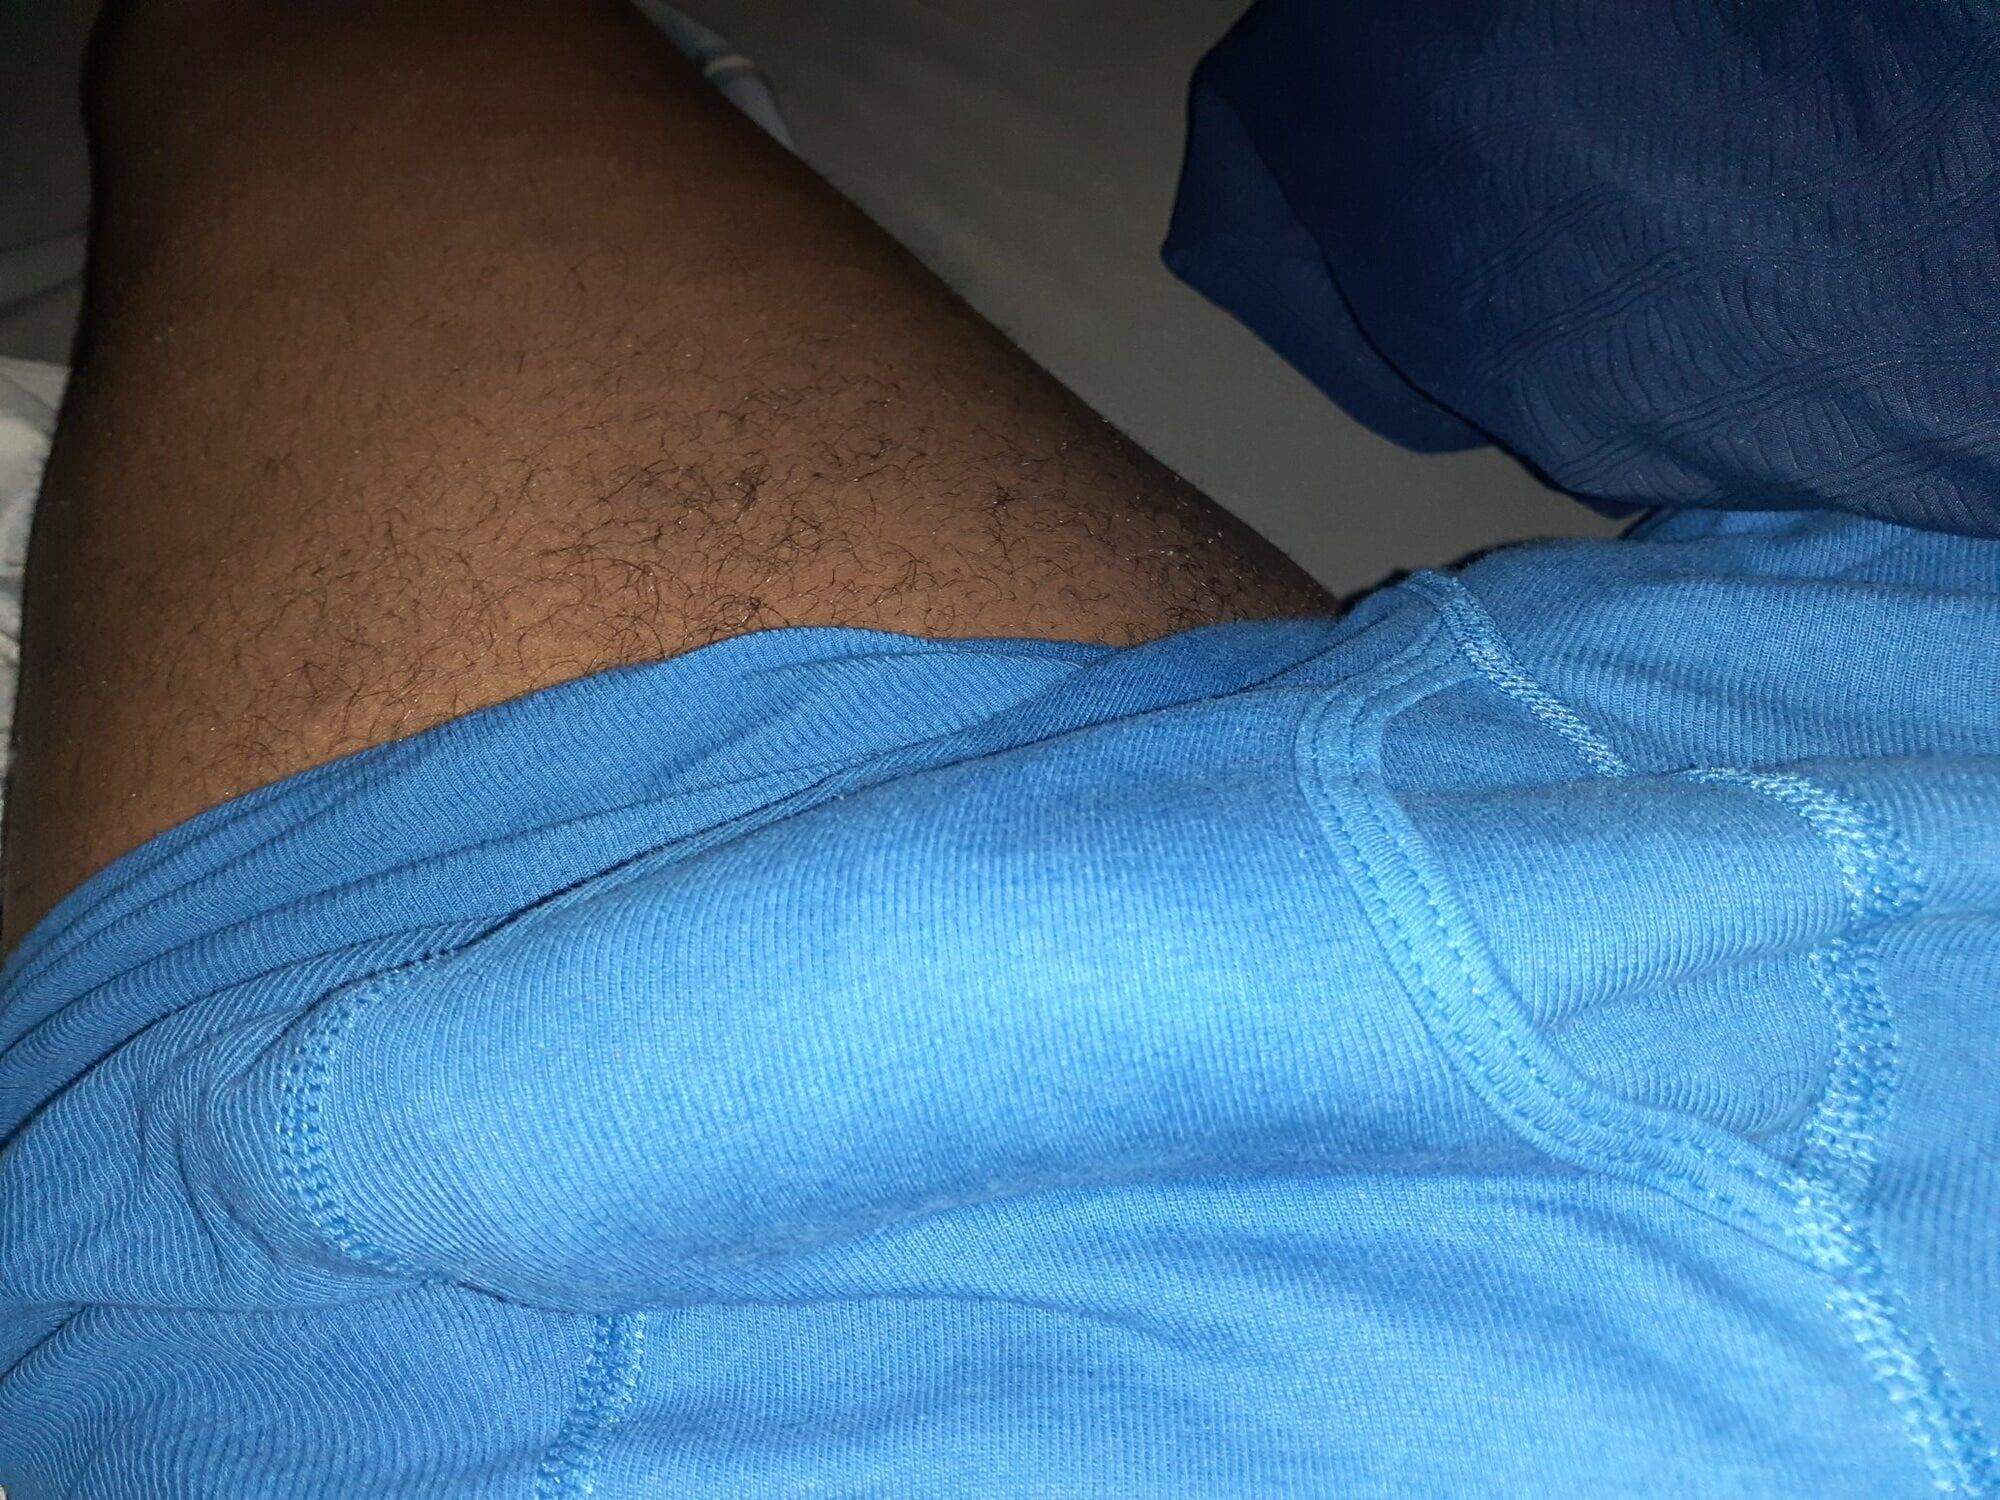 My cock #34